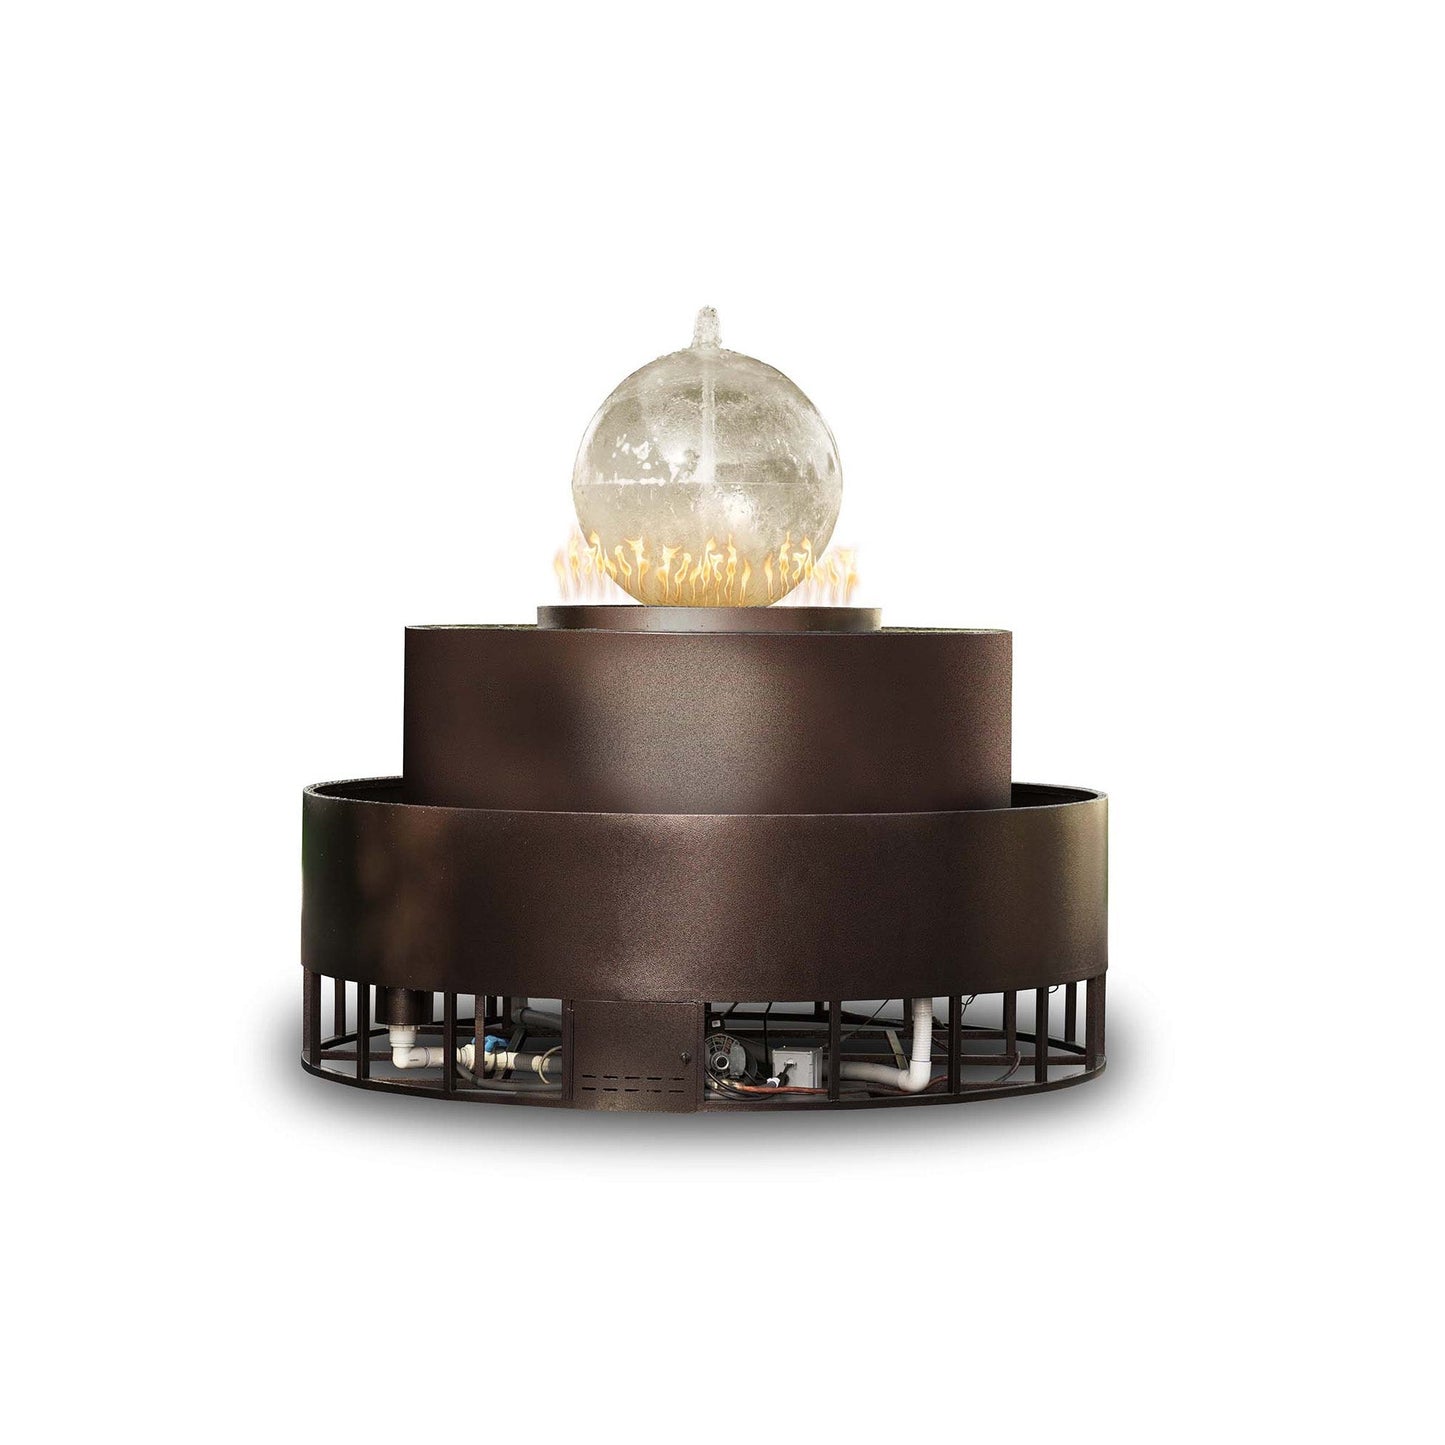 The Outdoor Plus Round Atlas 89" Black Powder Coated Liquid Propane Fire & Water Fountain with 12V Electronic Ignition